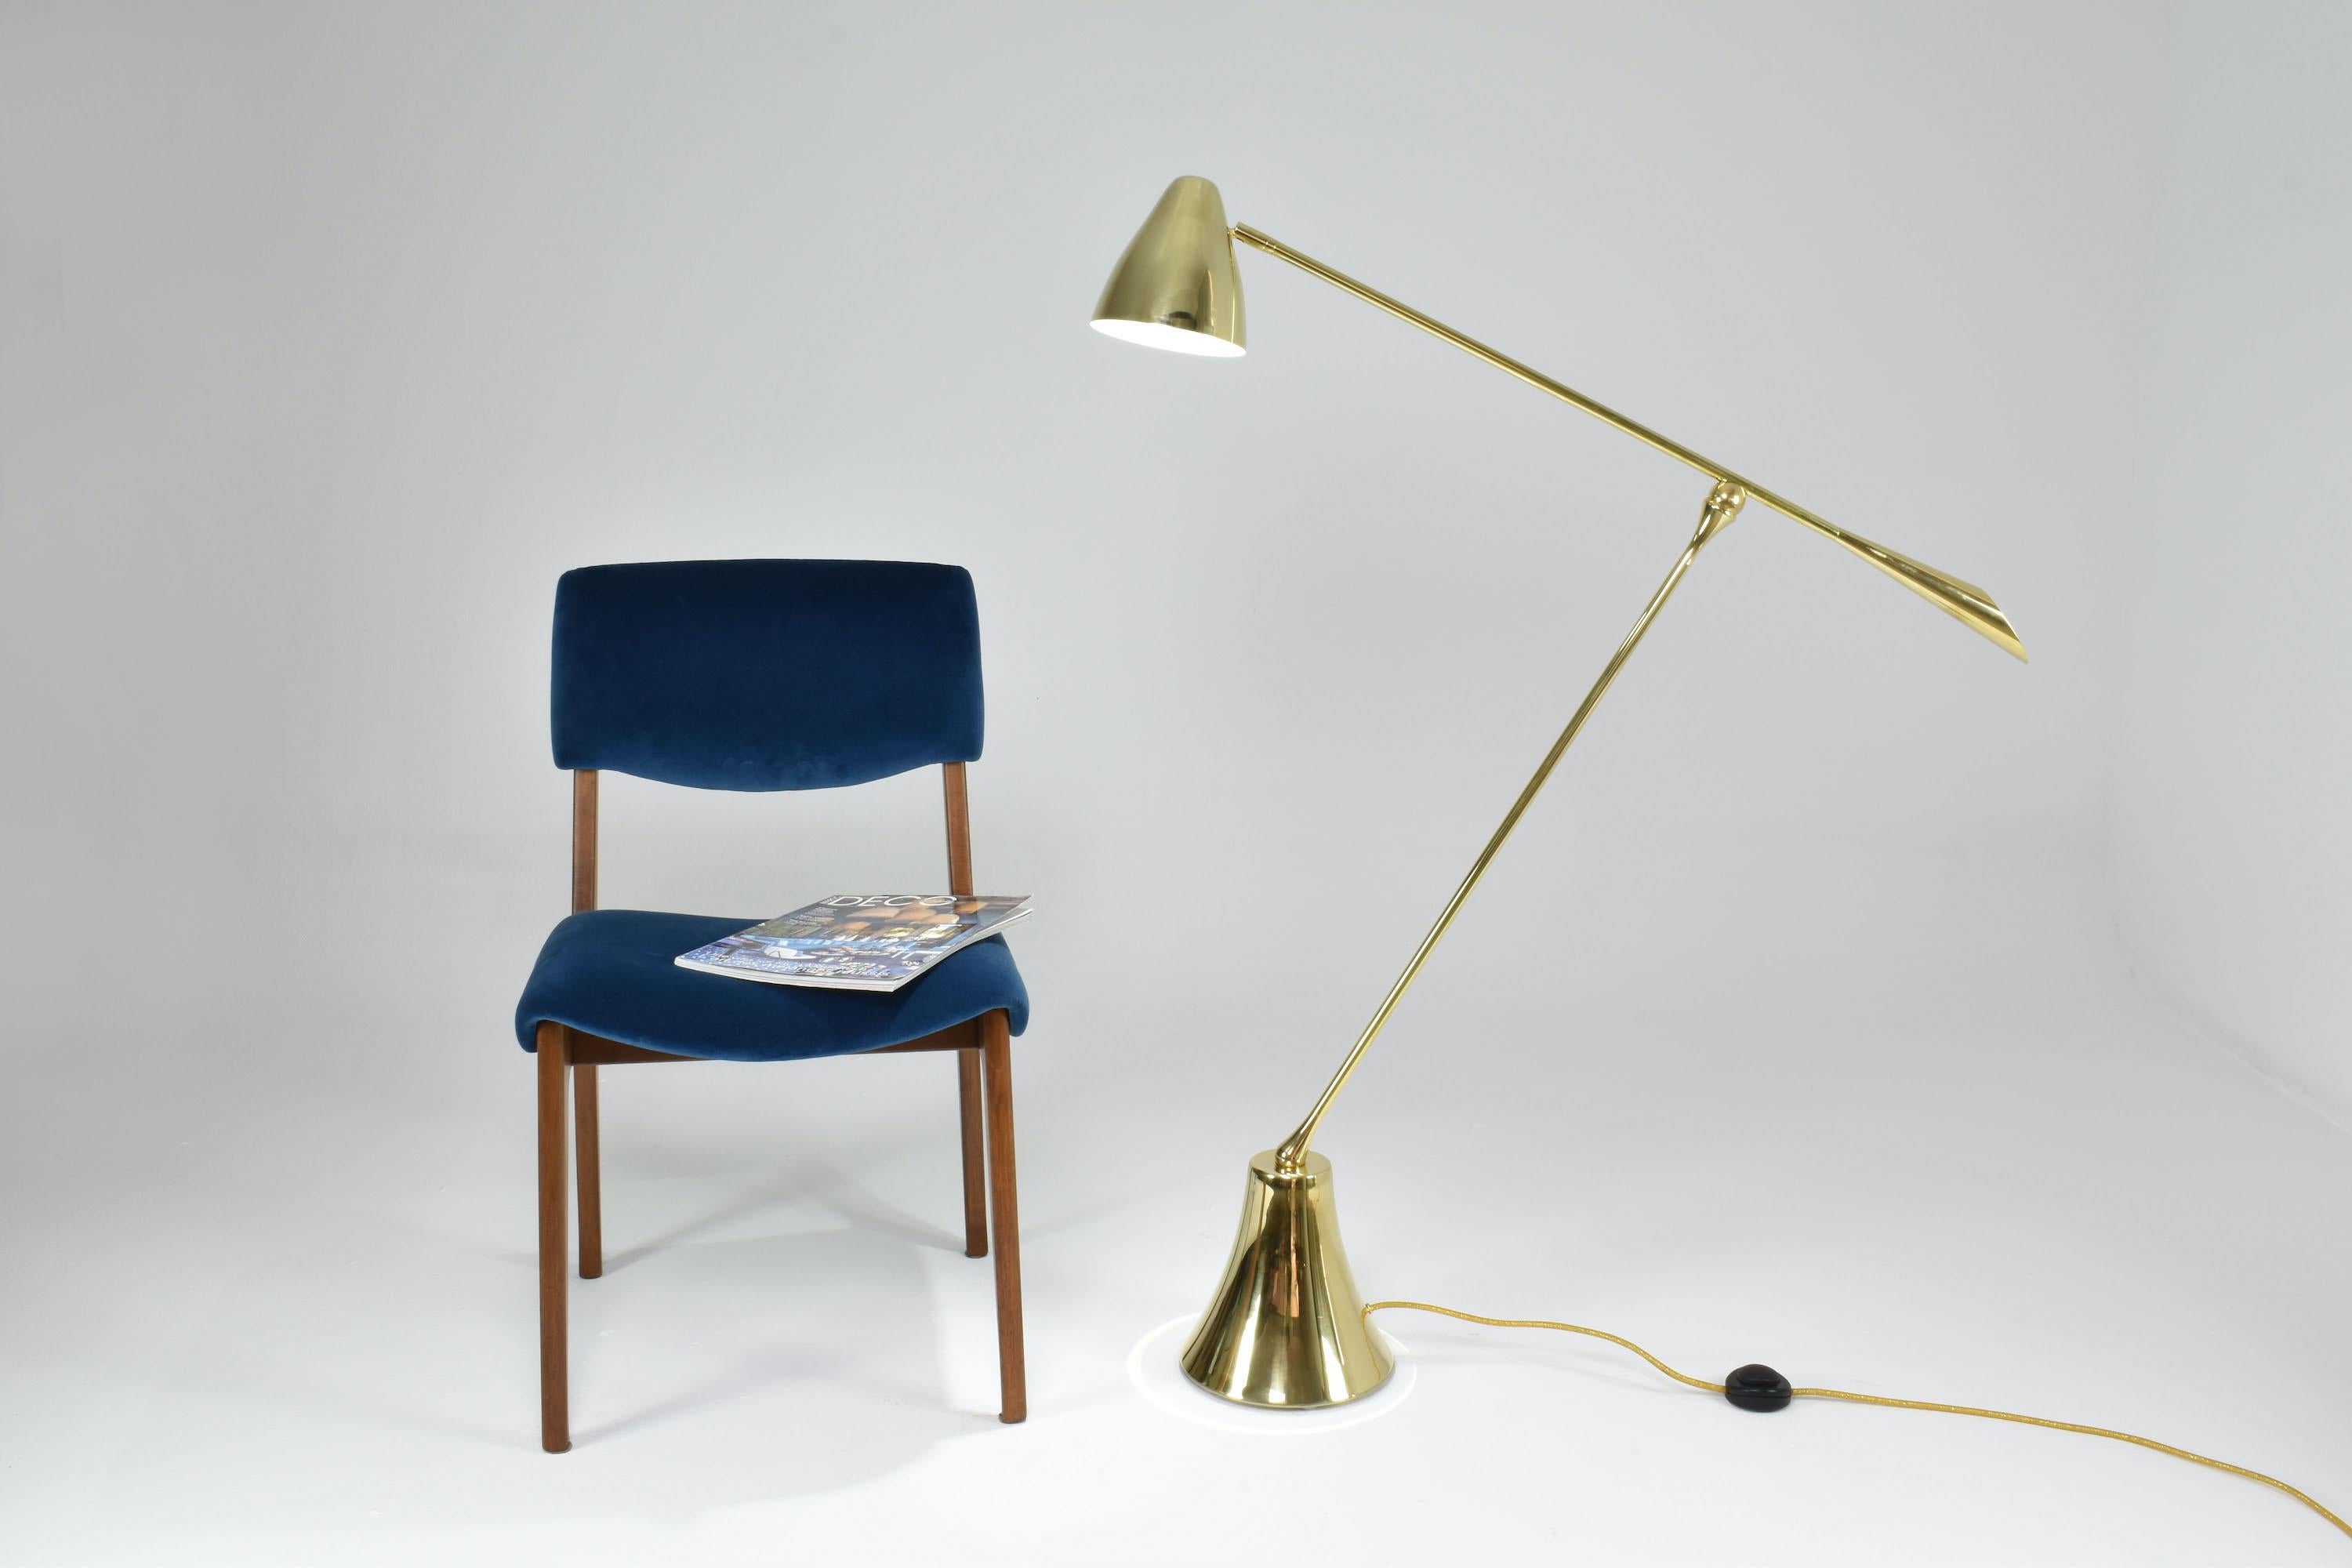 Introducing the De.Light-f3, a versatile multidirectional floor lamp crafted entirely from brass, designed to articulate in three key locations: the base of the shade, mid-arm, and base of the stem. Its angular-shaped shade diffuses a warm, focused